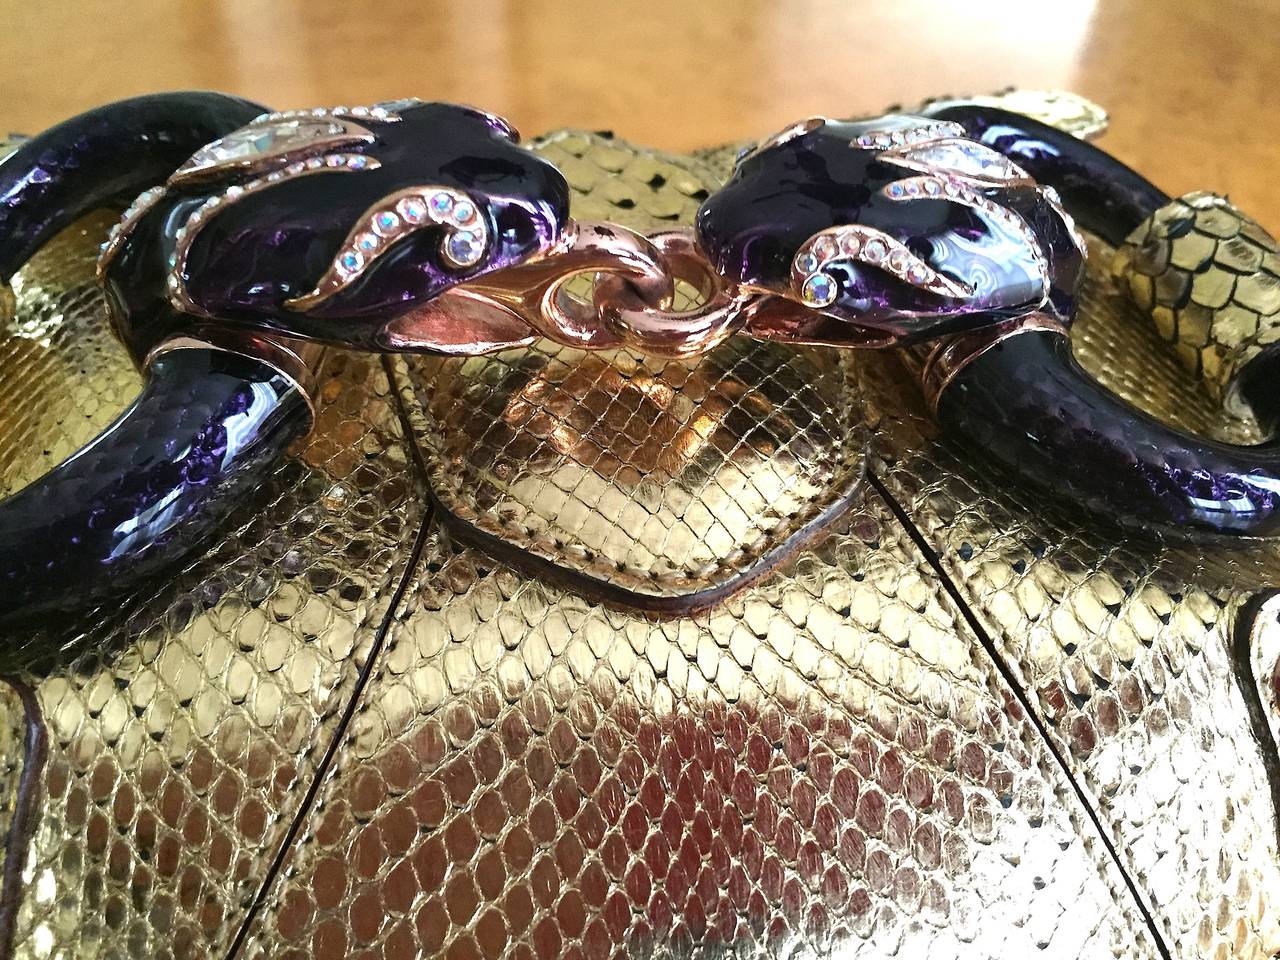 Gucci by Tom Ford Rare Limited Edition Mini Gold Python Clutch with Jeweled Serpent Horsebit

This is exquisite.  Golden python skin with purple enamel jeweled serpent horsebit and 